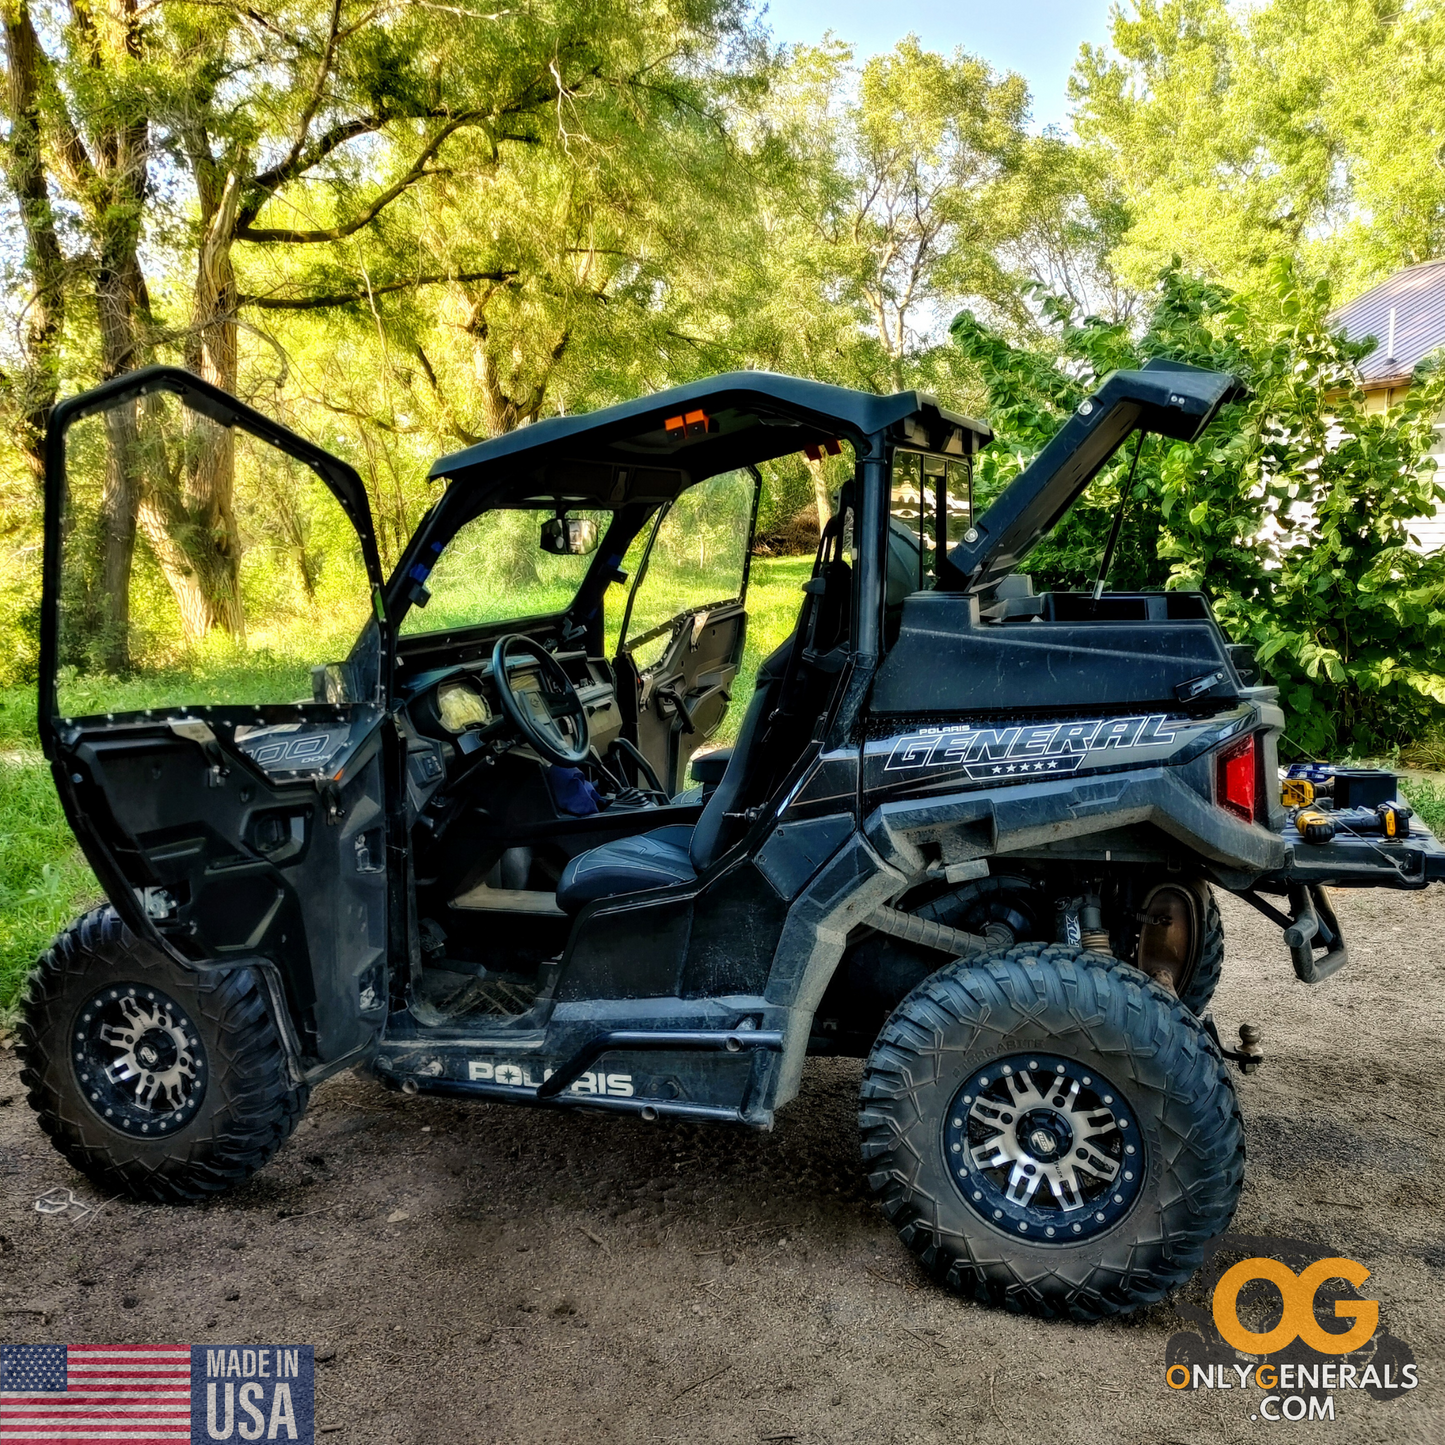 A workhorse of a machine. The Polaris General with the OnlyGenerals SideskinsLITE hard upper doors installed & opened